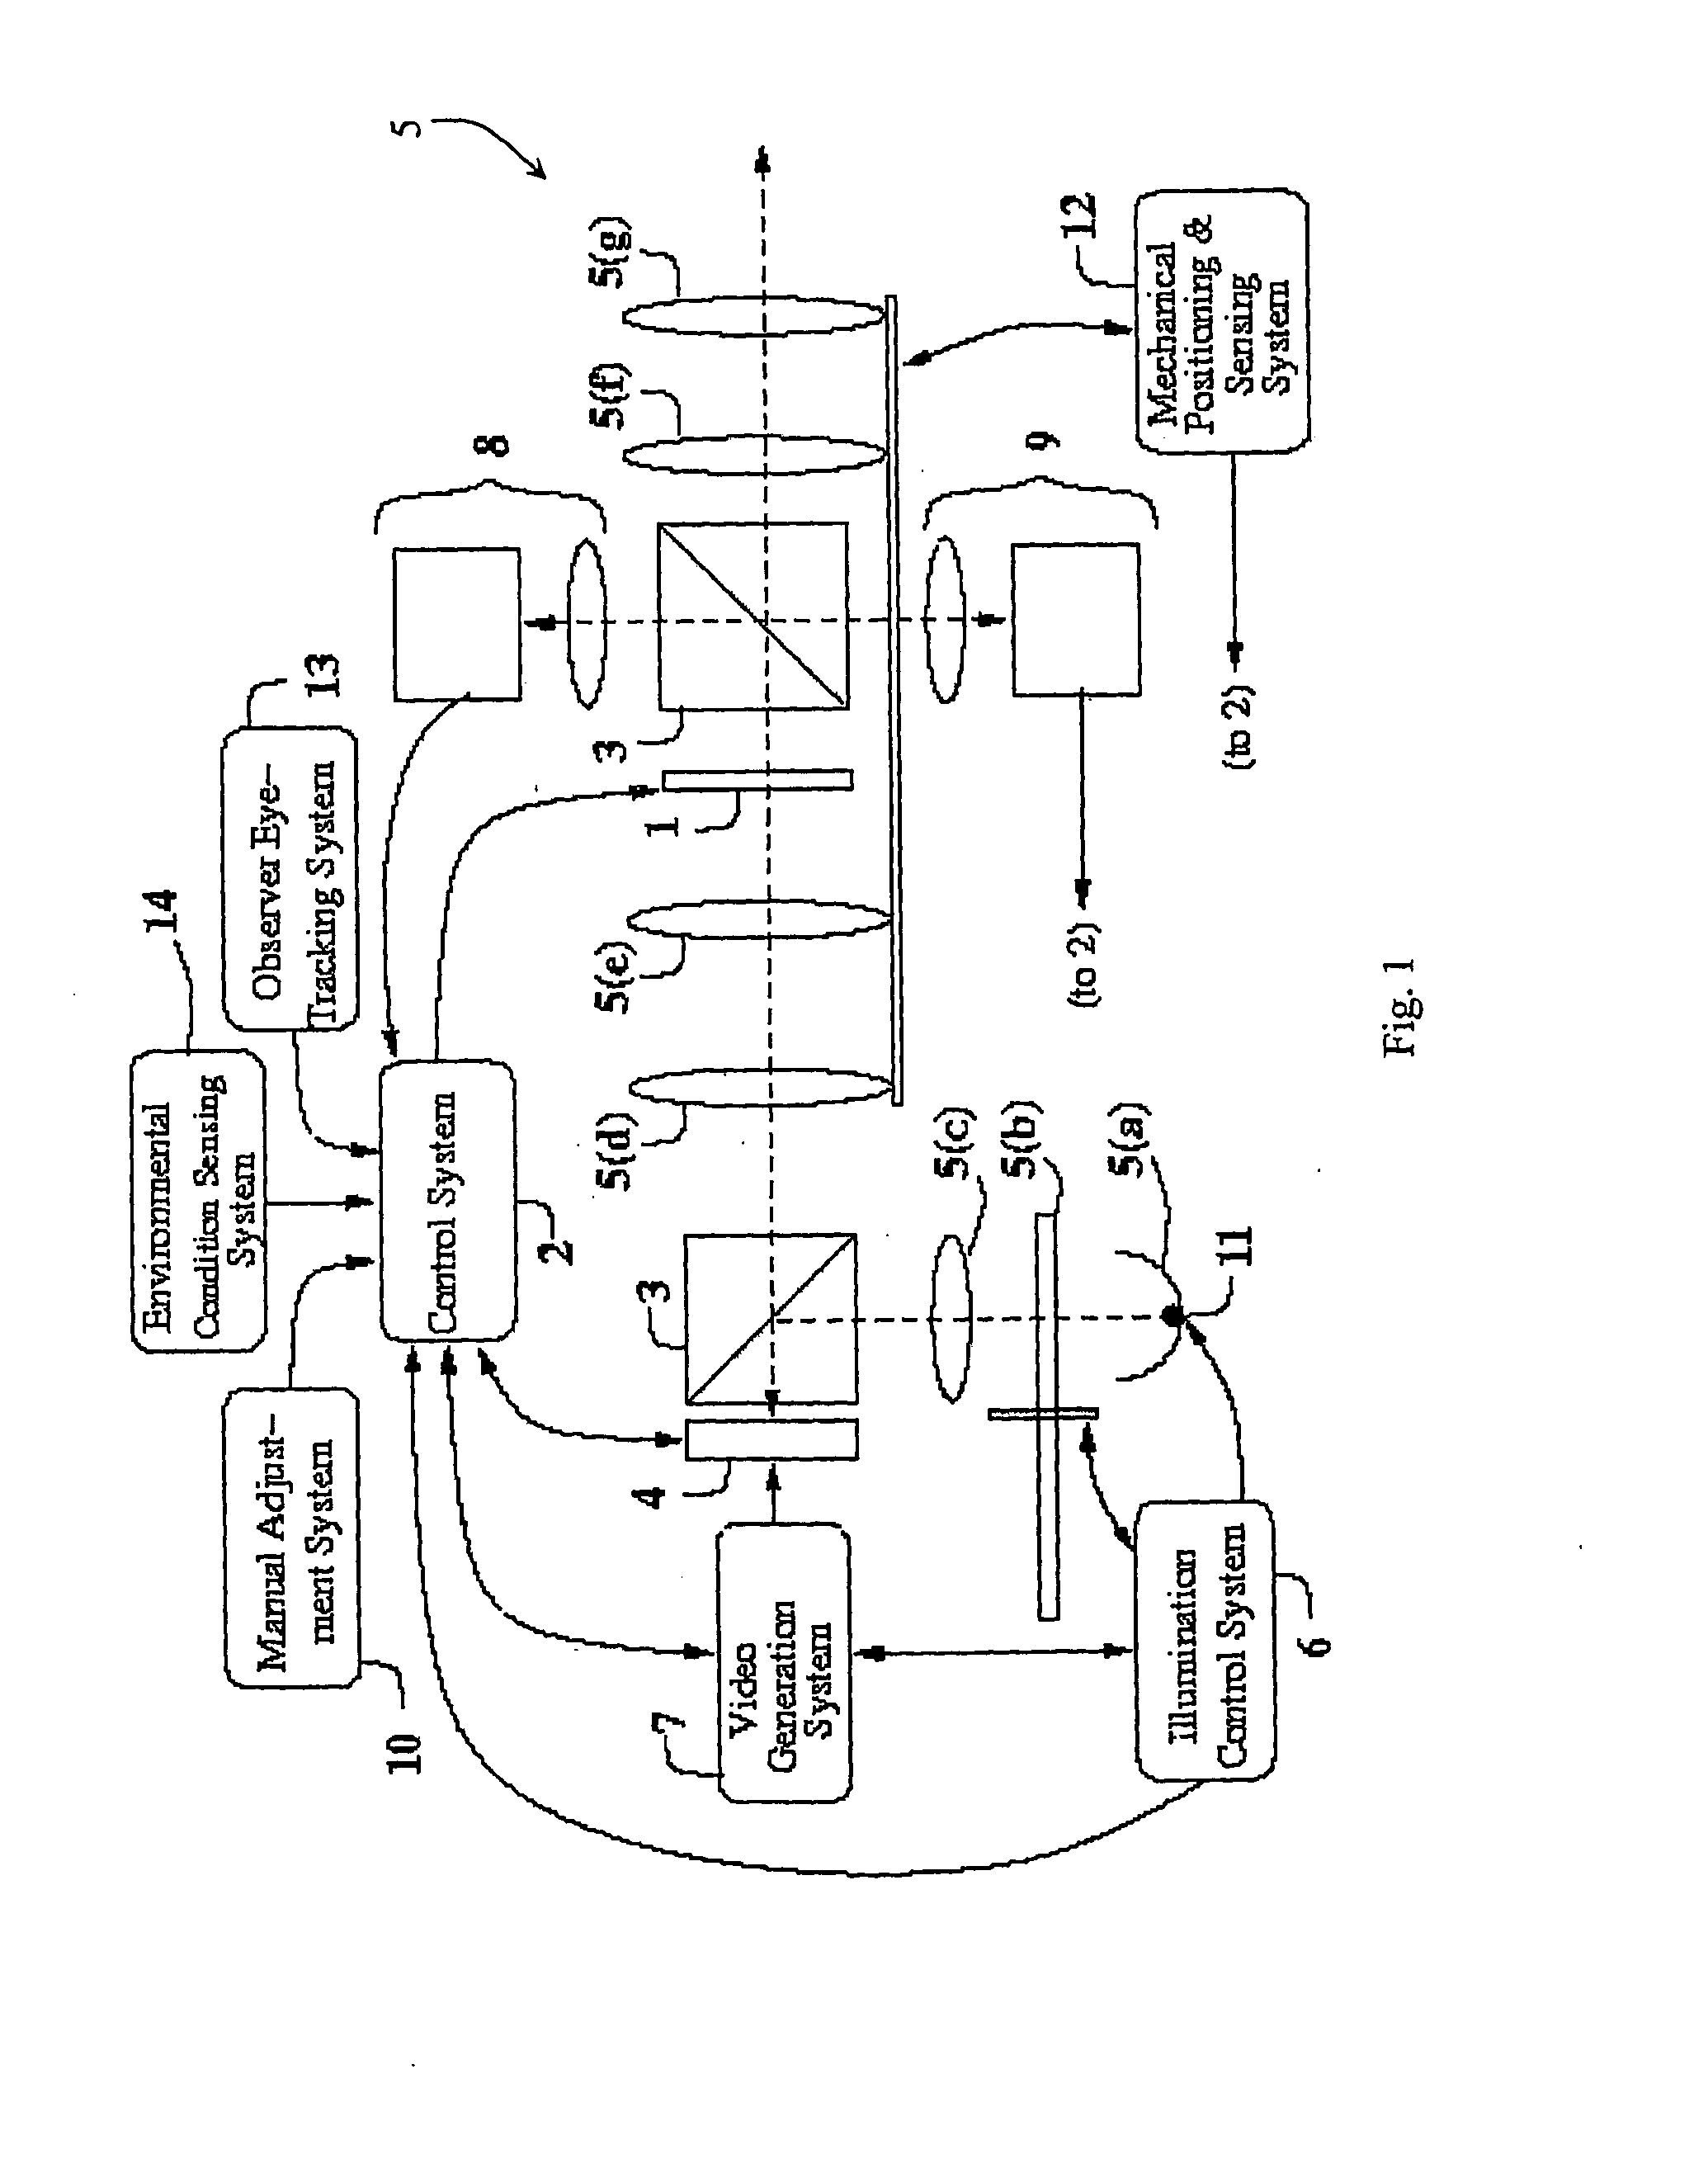 Image Projection Display System